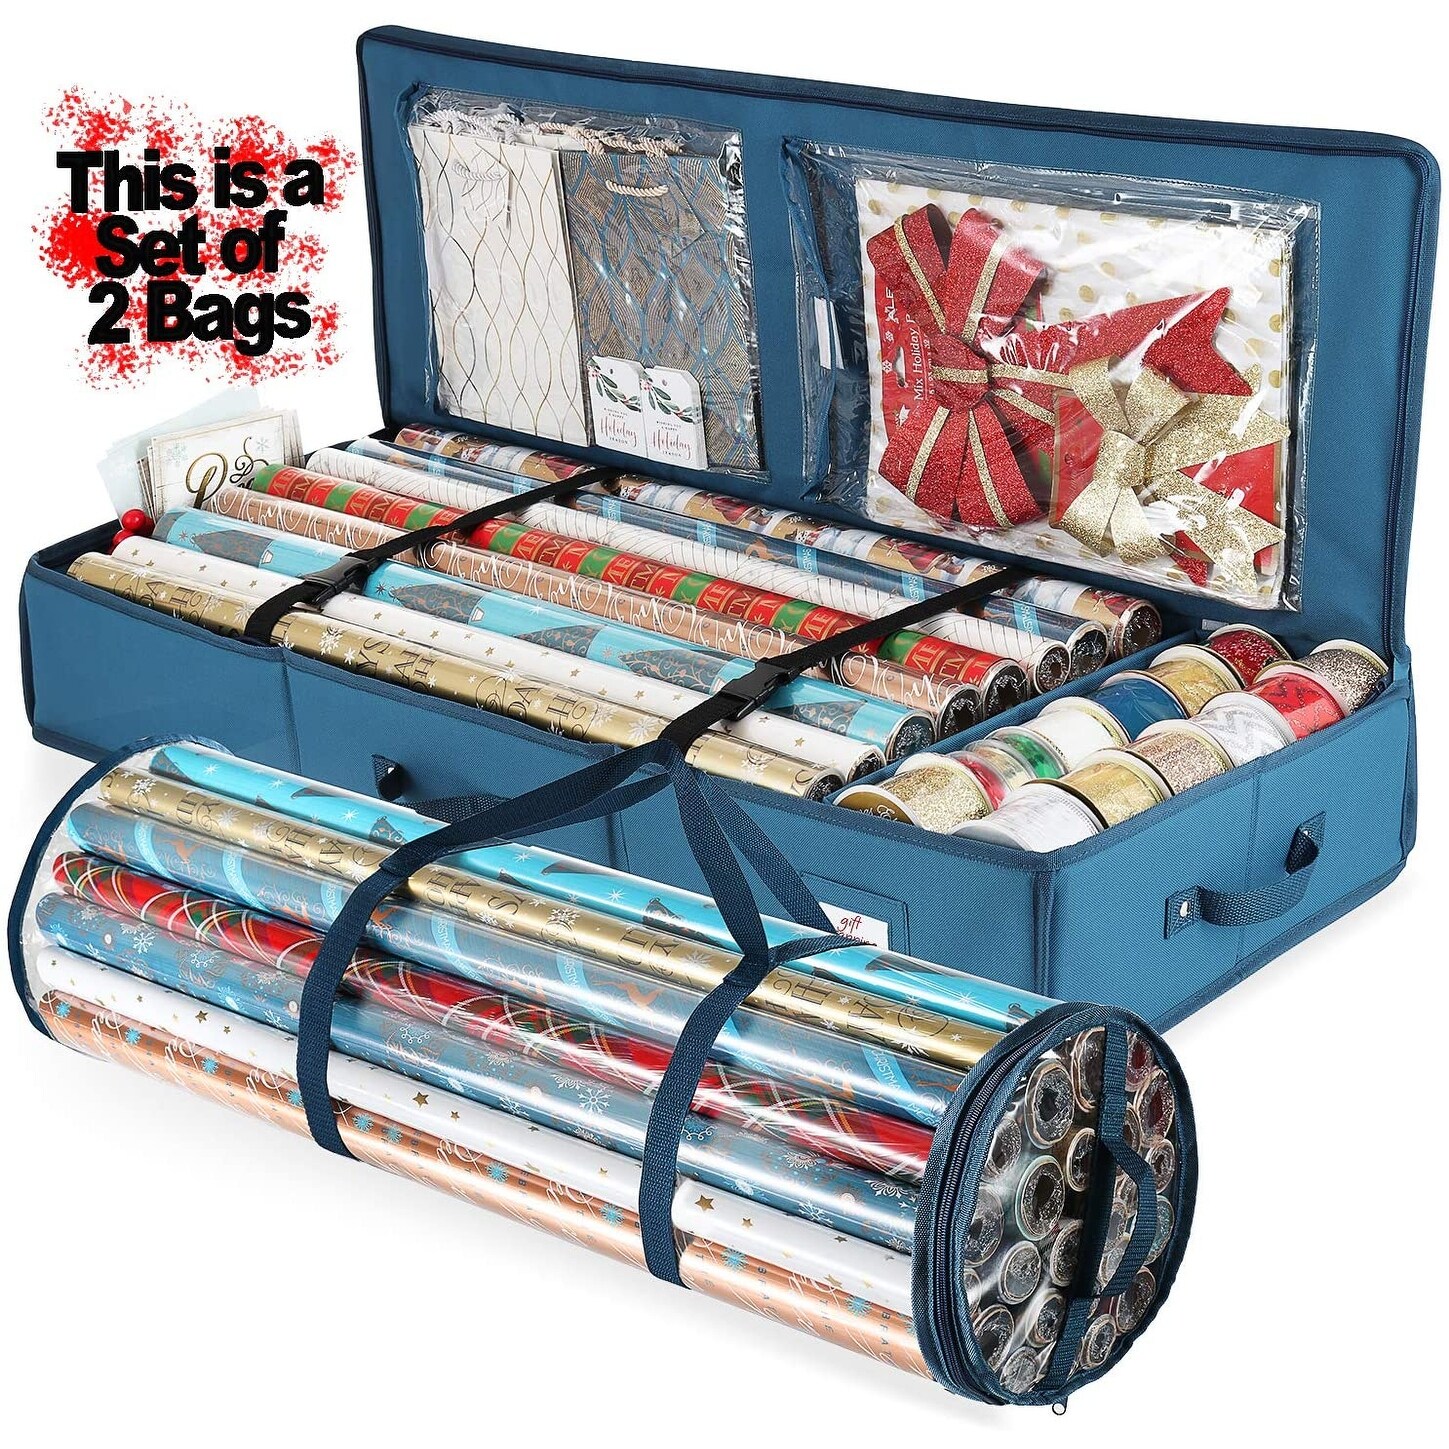 StorageBud Tear Proof Gift Wrapping Paper Storage Container - Premium  Christmas Wrapping Paper Holder - On Sale - Bed Bath & Beyond - 36784827